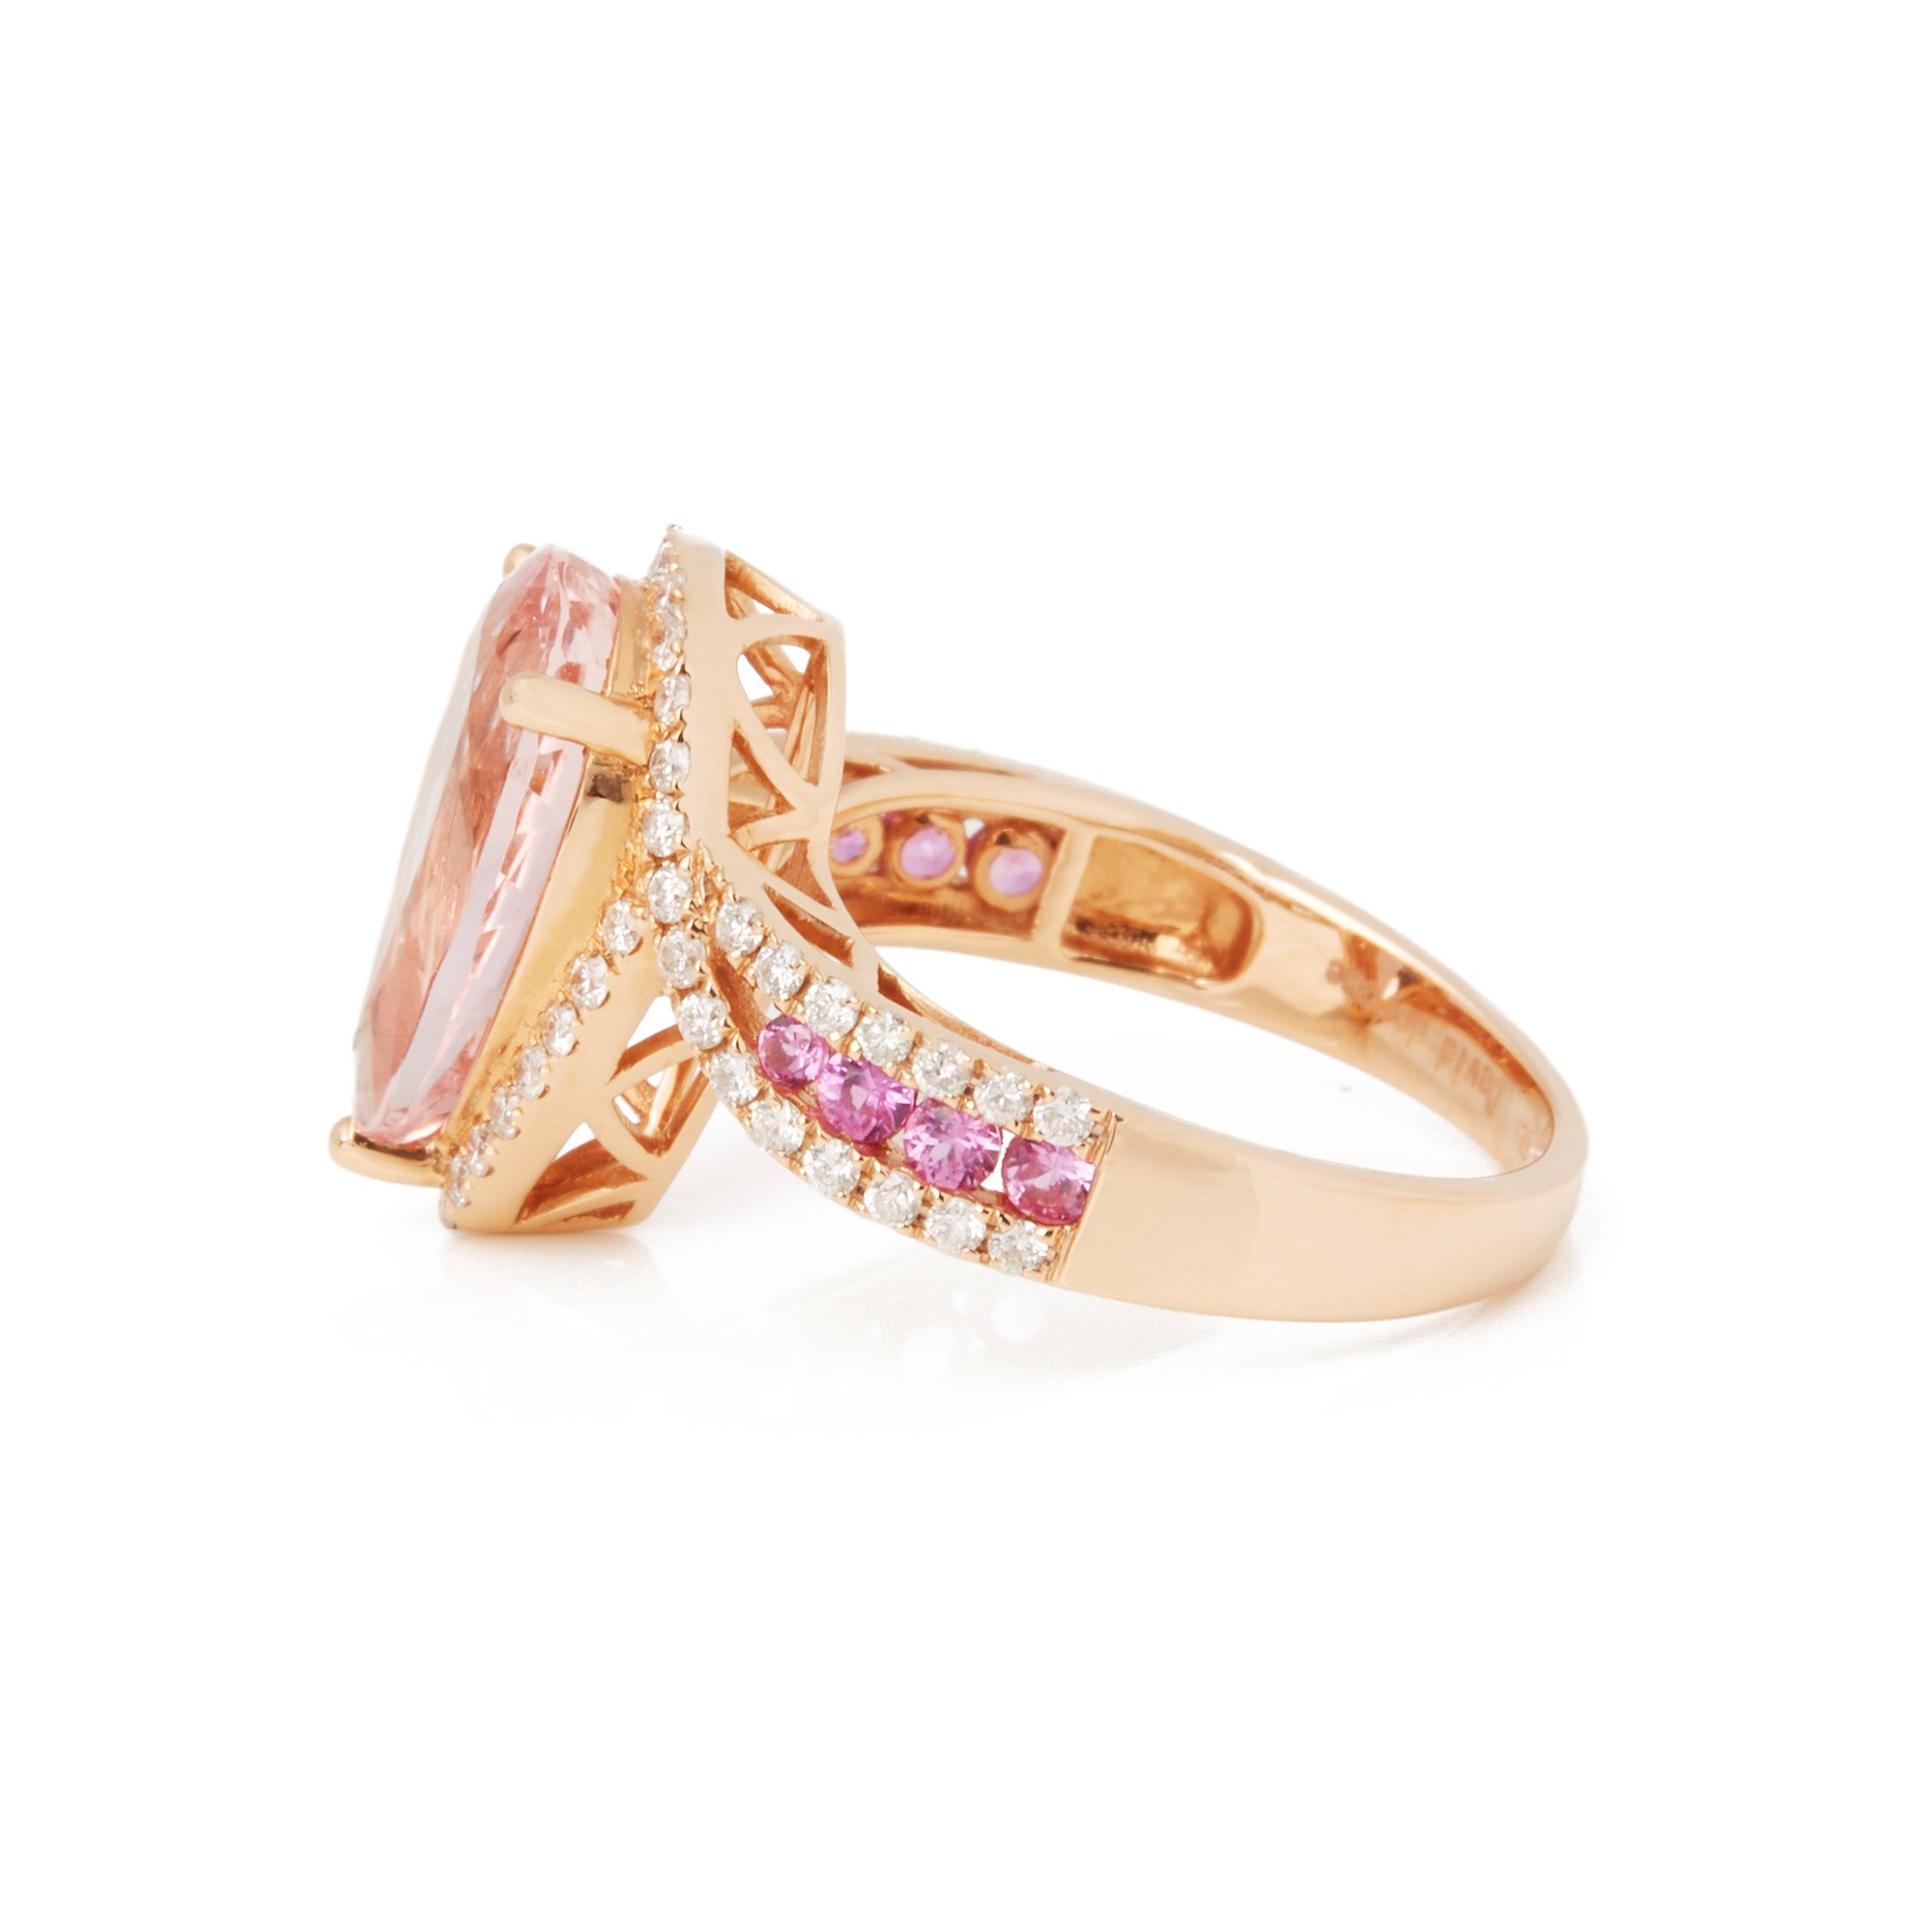 David Jerome 18ct Rose Gold Morganite, Diamond and pink Sapphire Cluster Ring